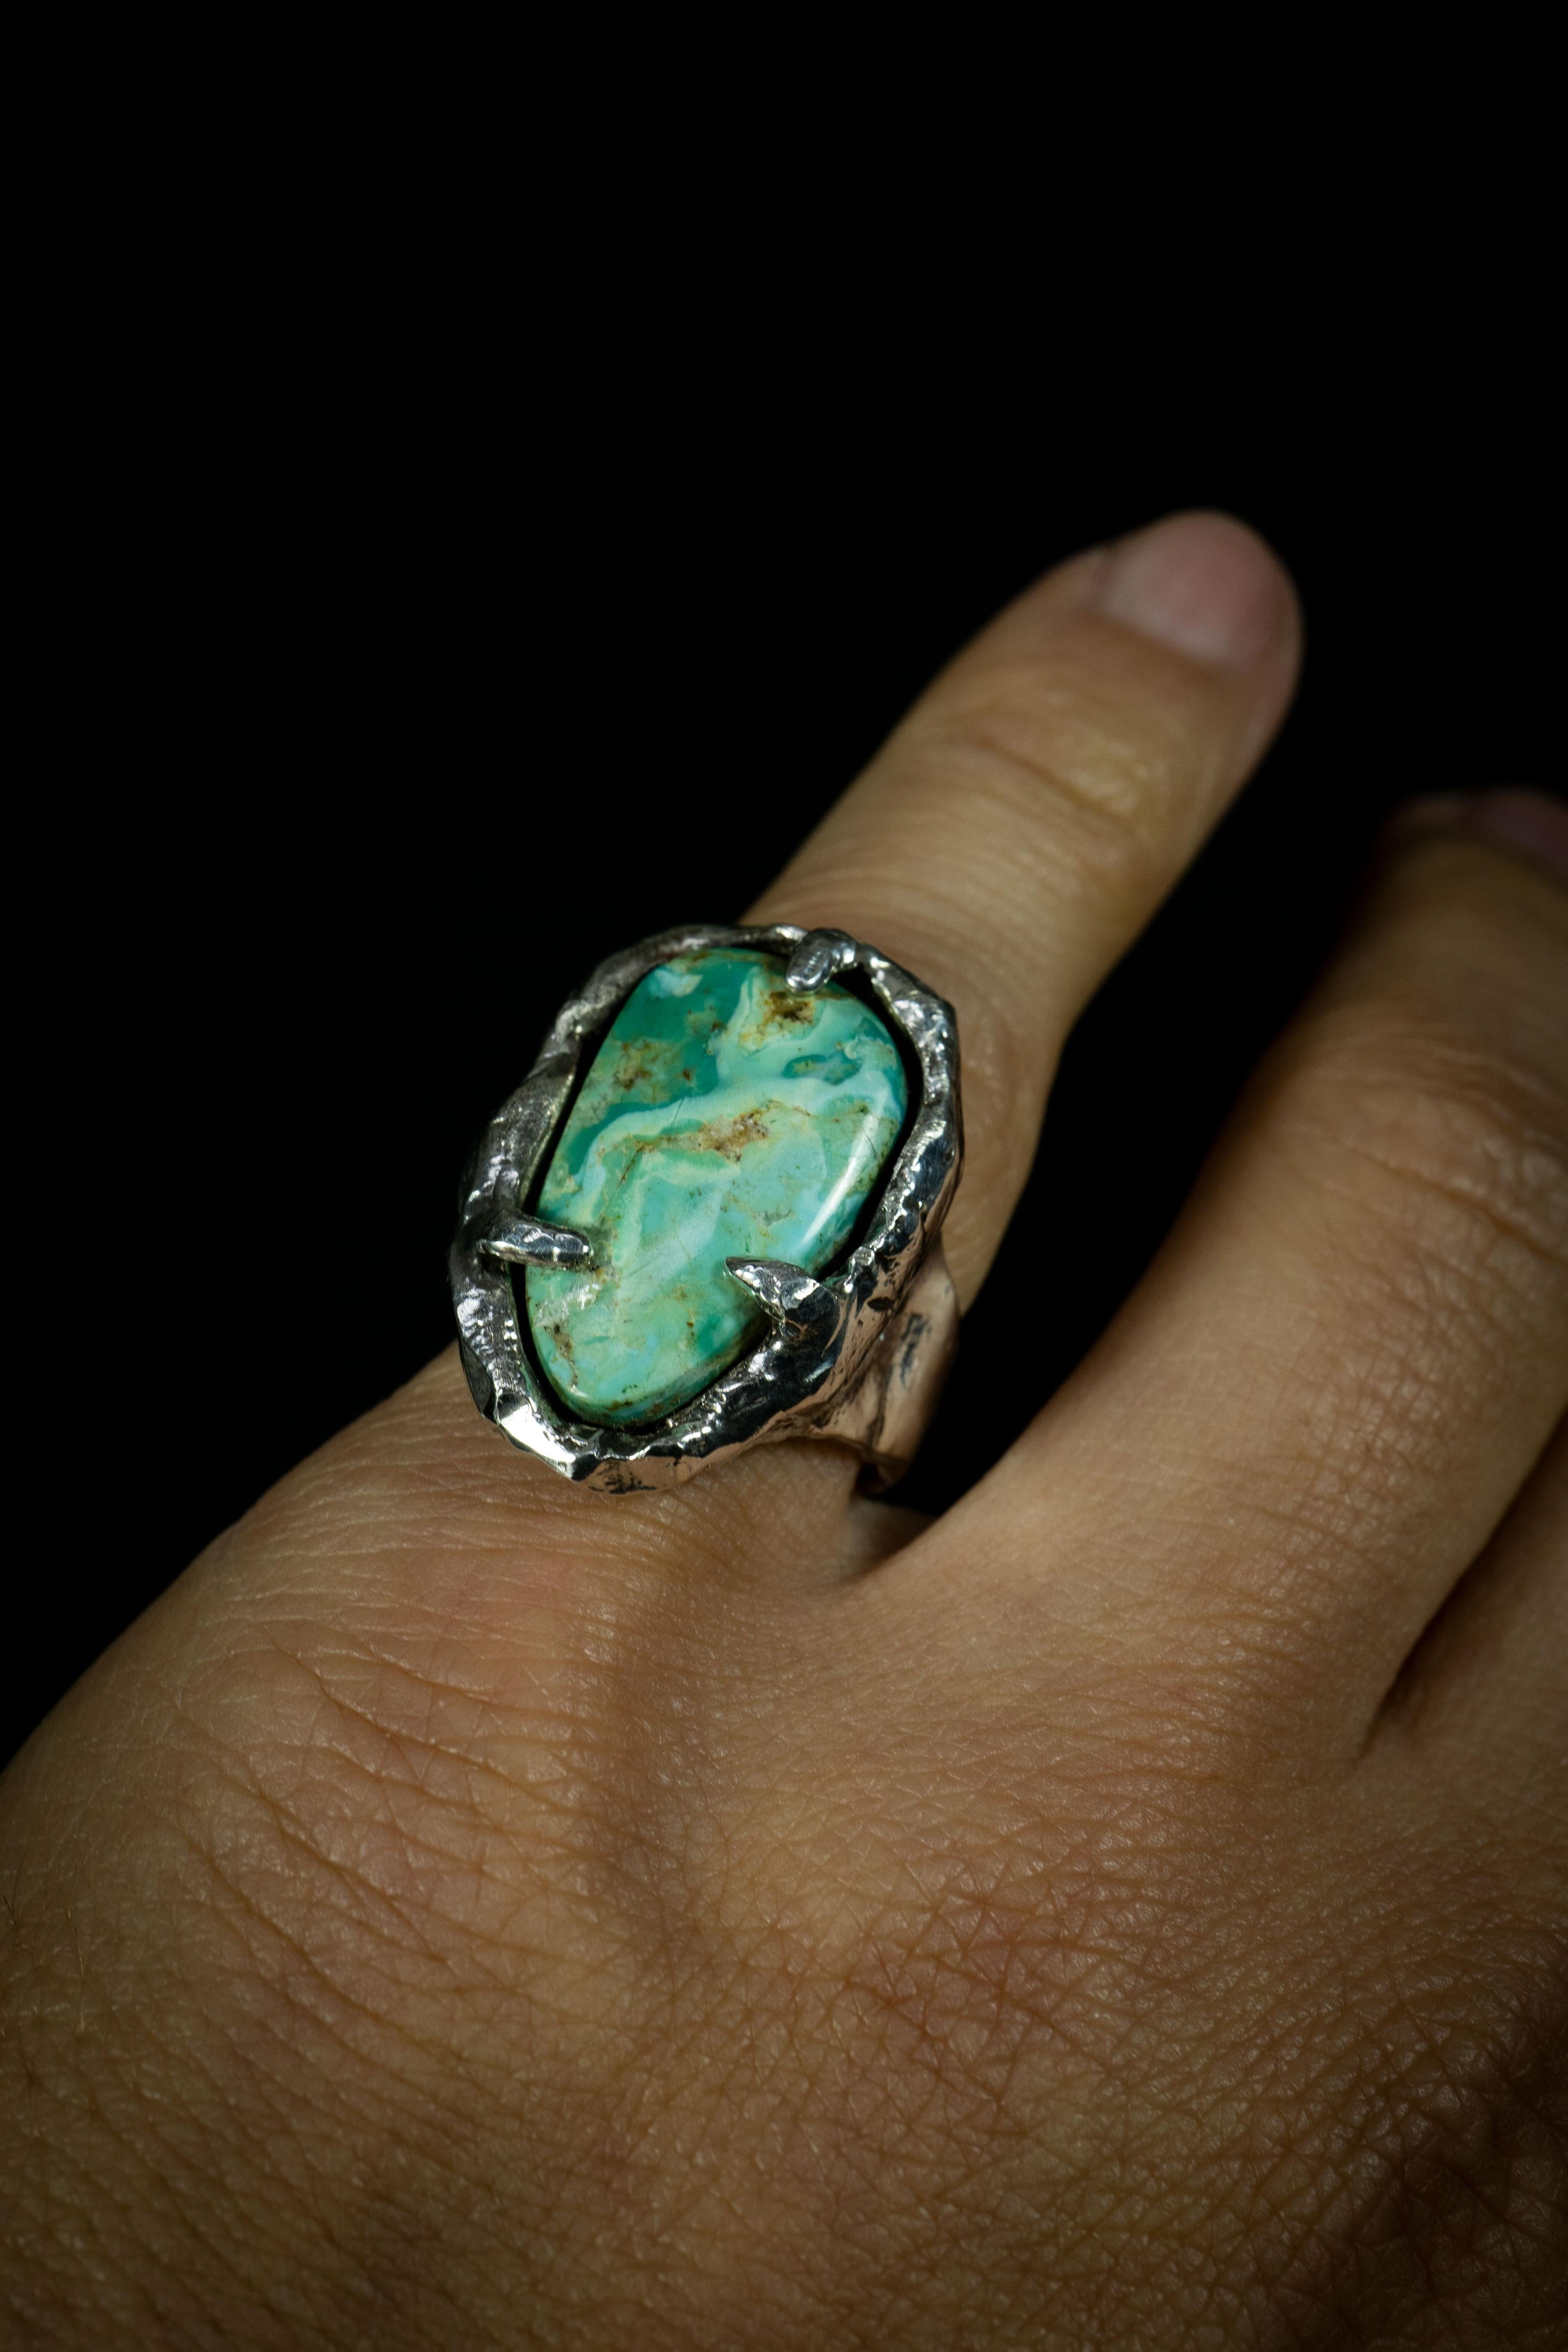 Traveling Dream is an exceptional handmade ring by Ken Fury, crafted from sterling silver and adorned with a mesmerizing Baja turquoise stone sourced from California. The unique design of the ring symbolizes the journey of self-discovery, personal